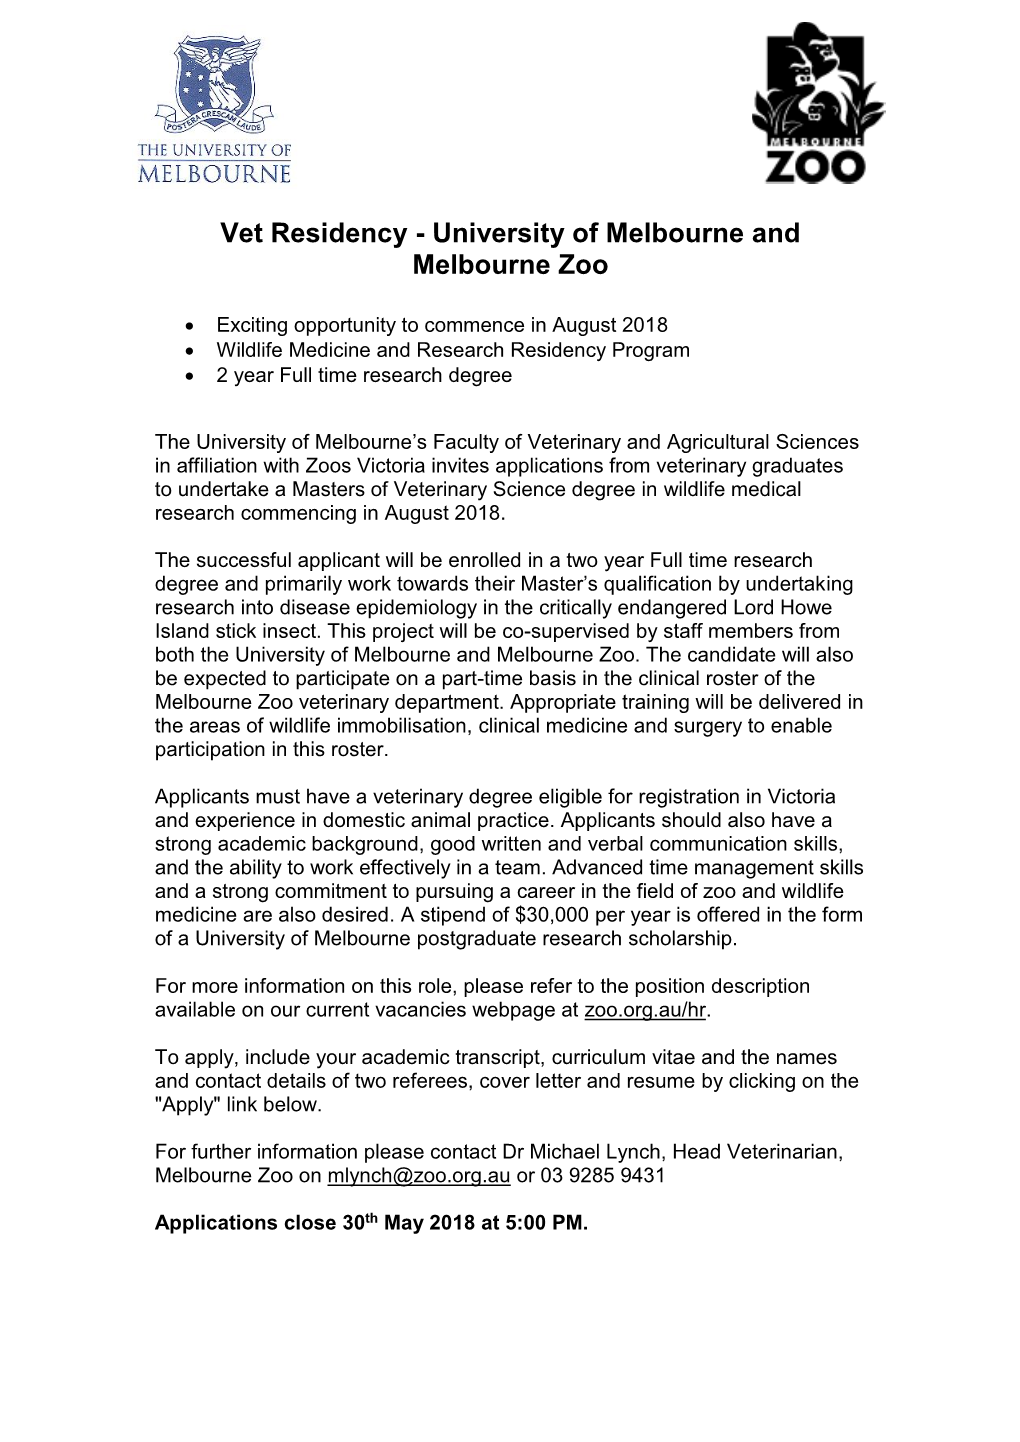 Vet Residency - University of Melbourne and Melbourne Zoo